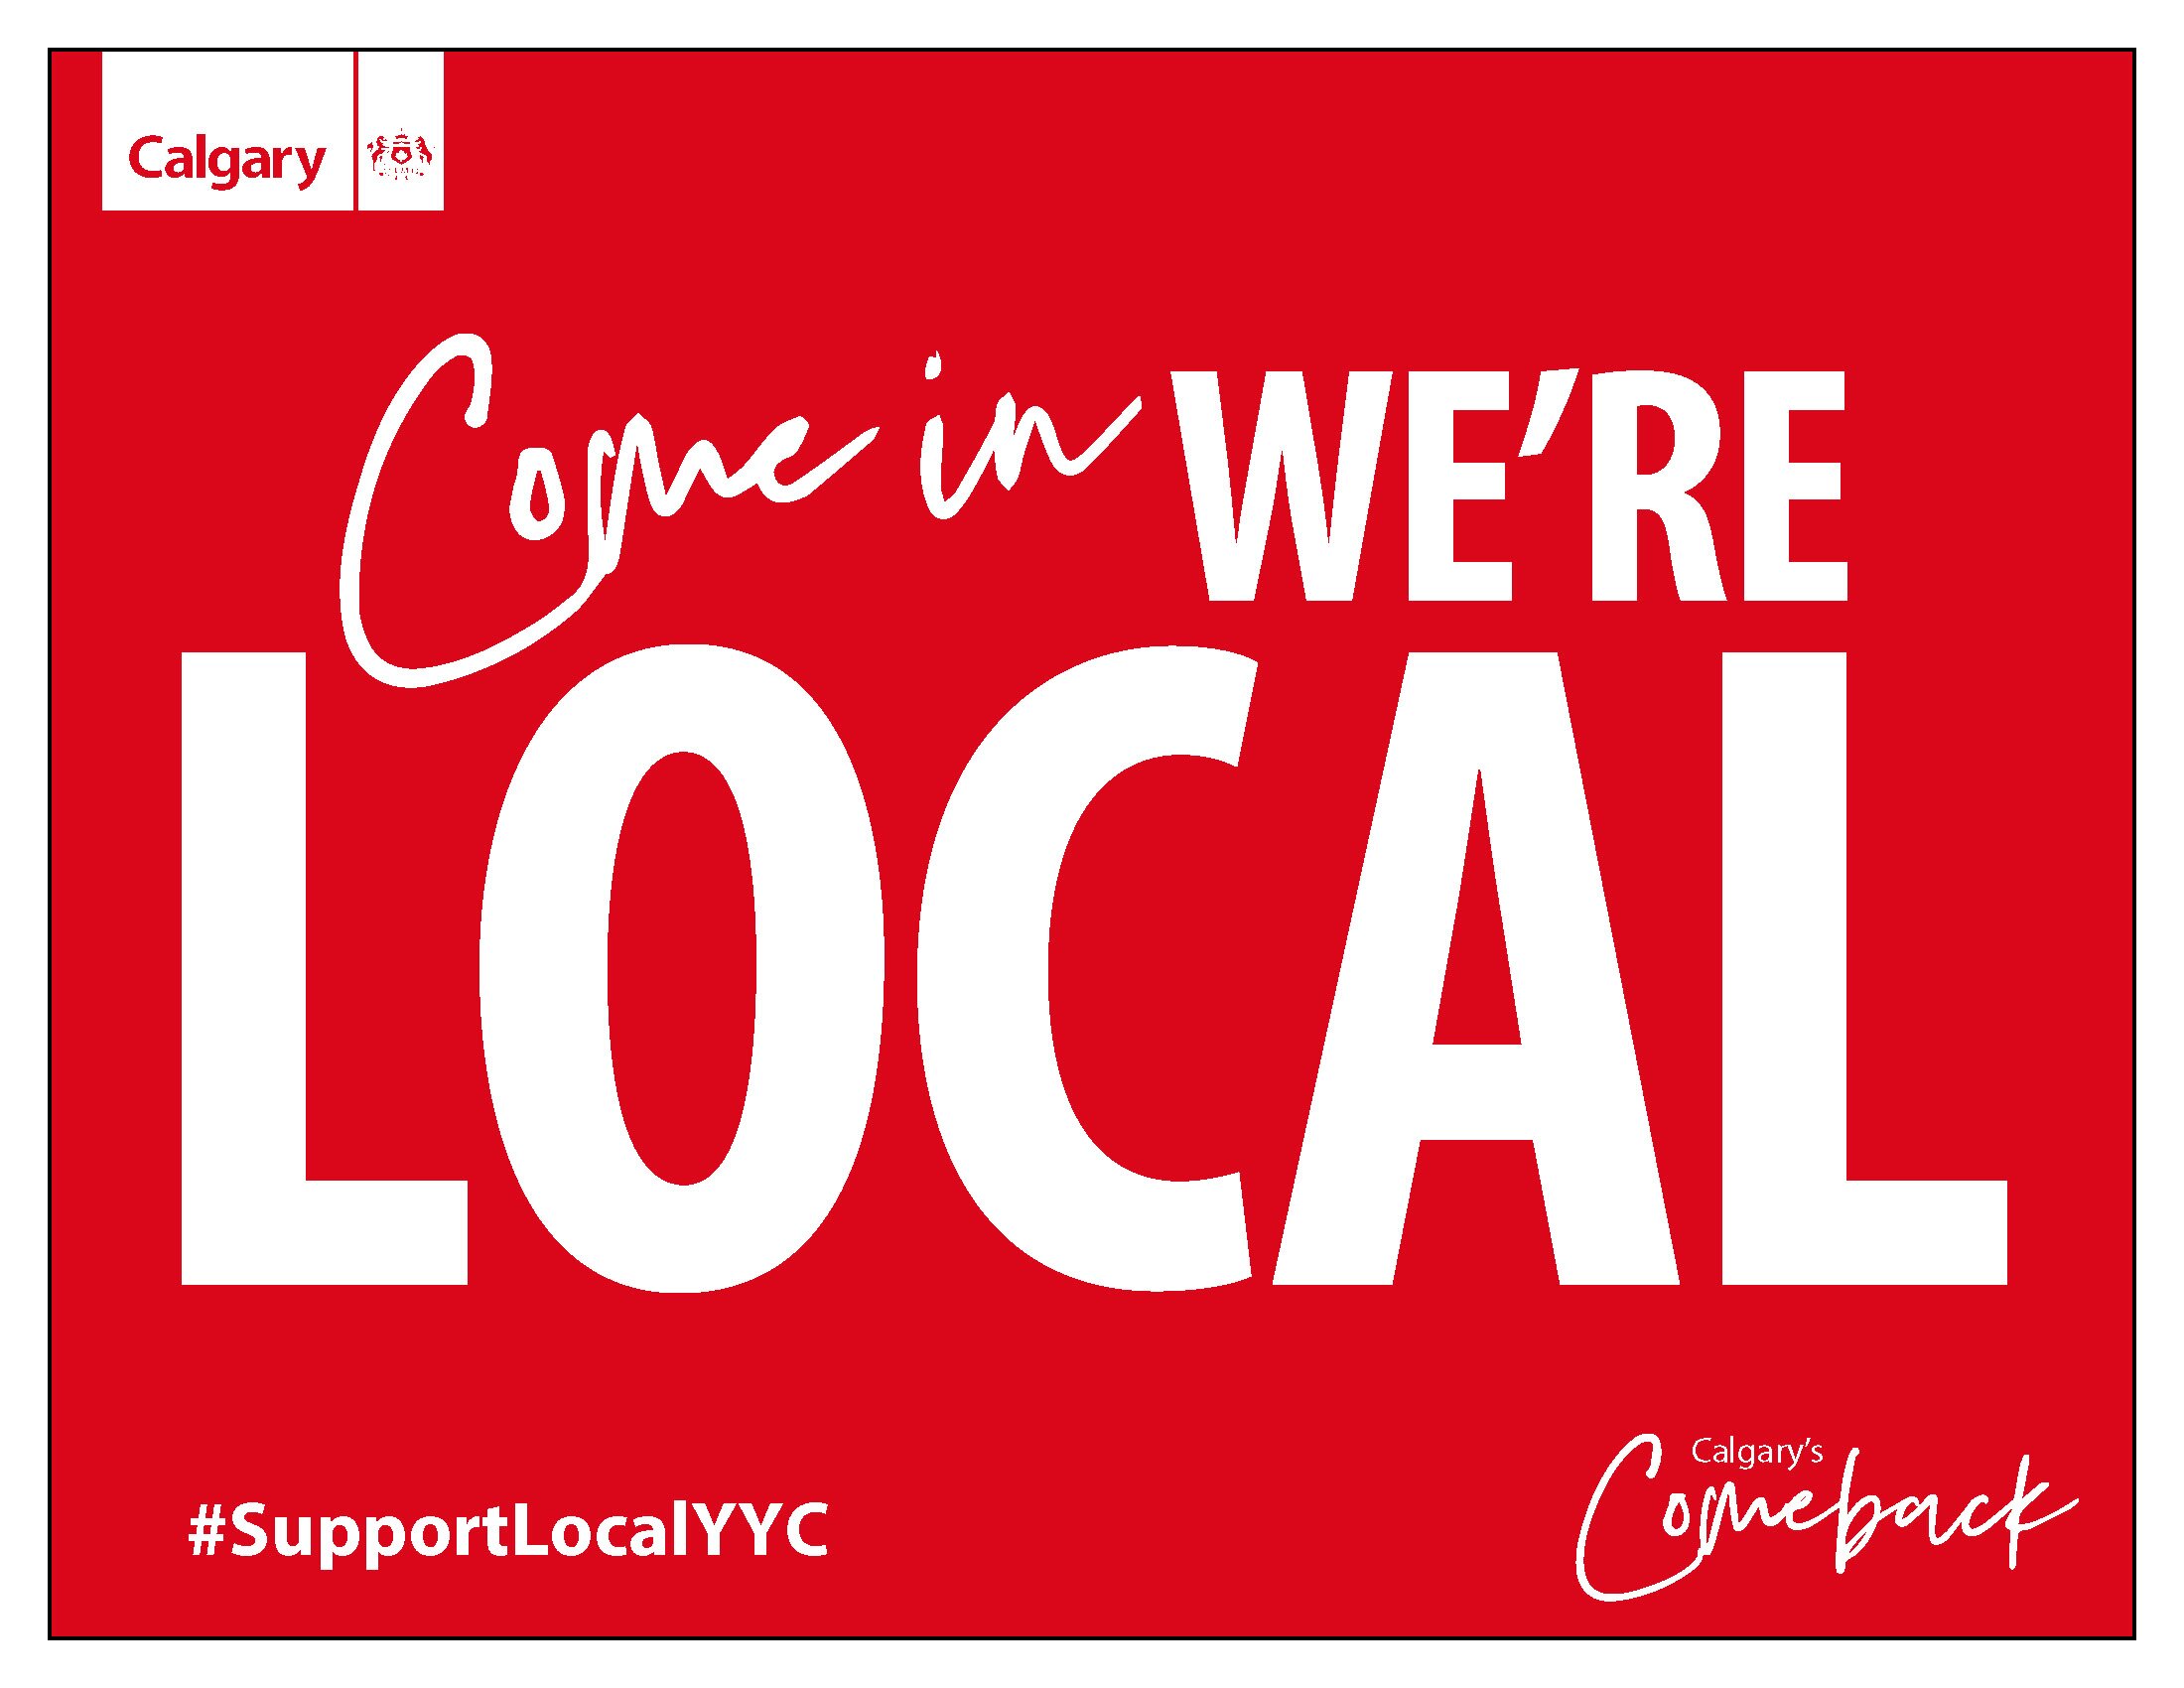 shop-local-partner-campaign---we-27re-local-11x8.5-sign-p43.jpg